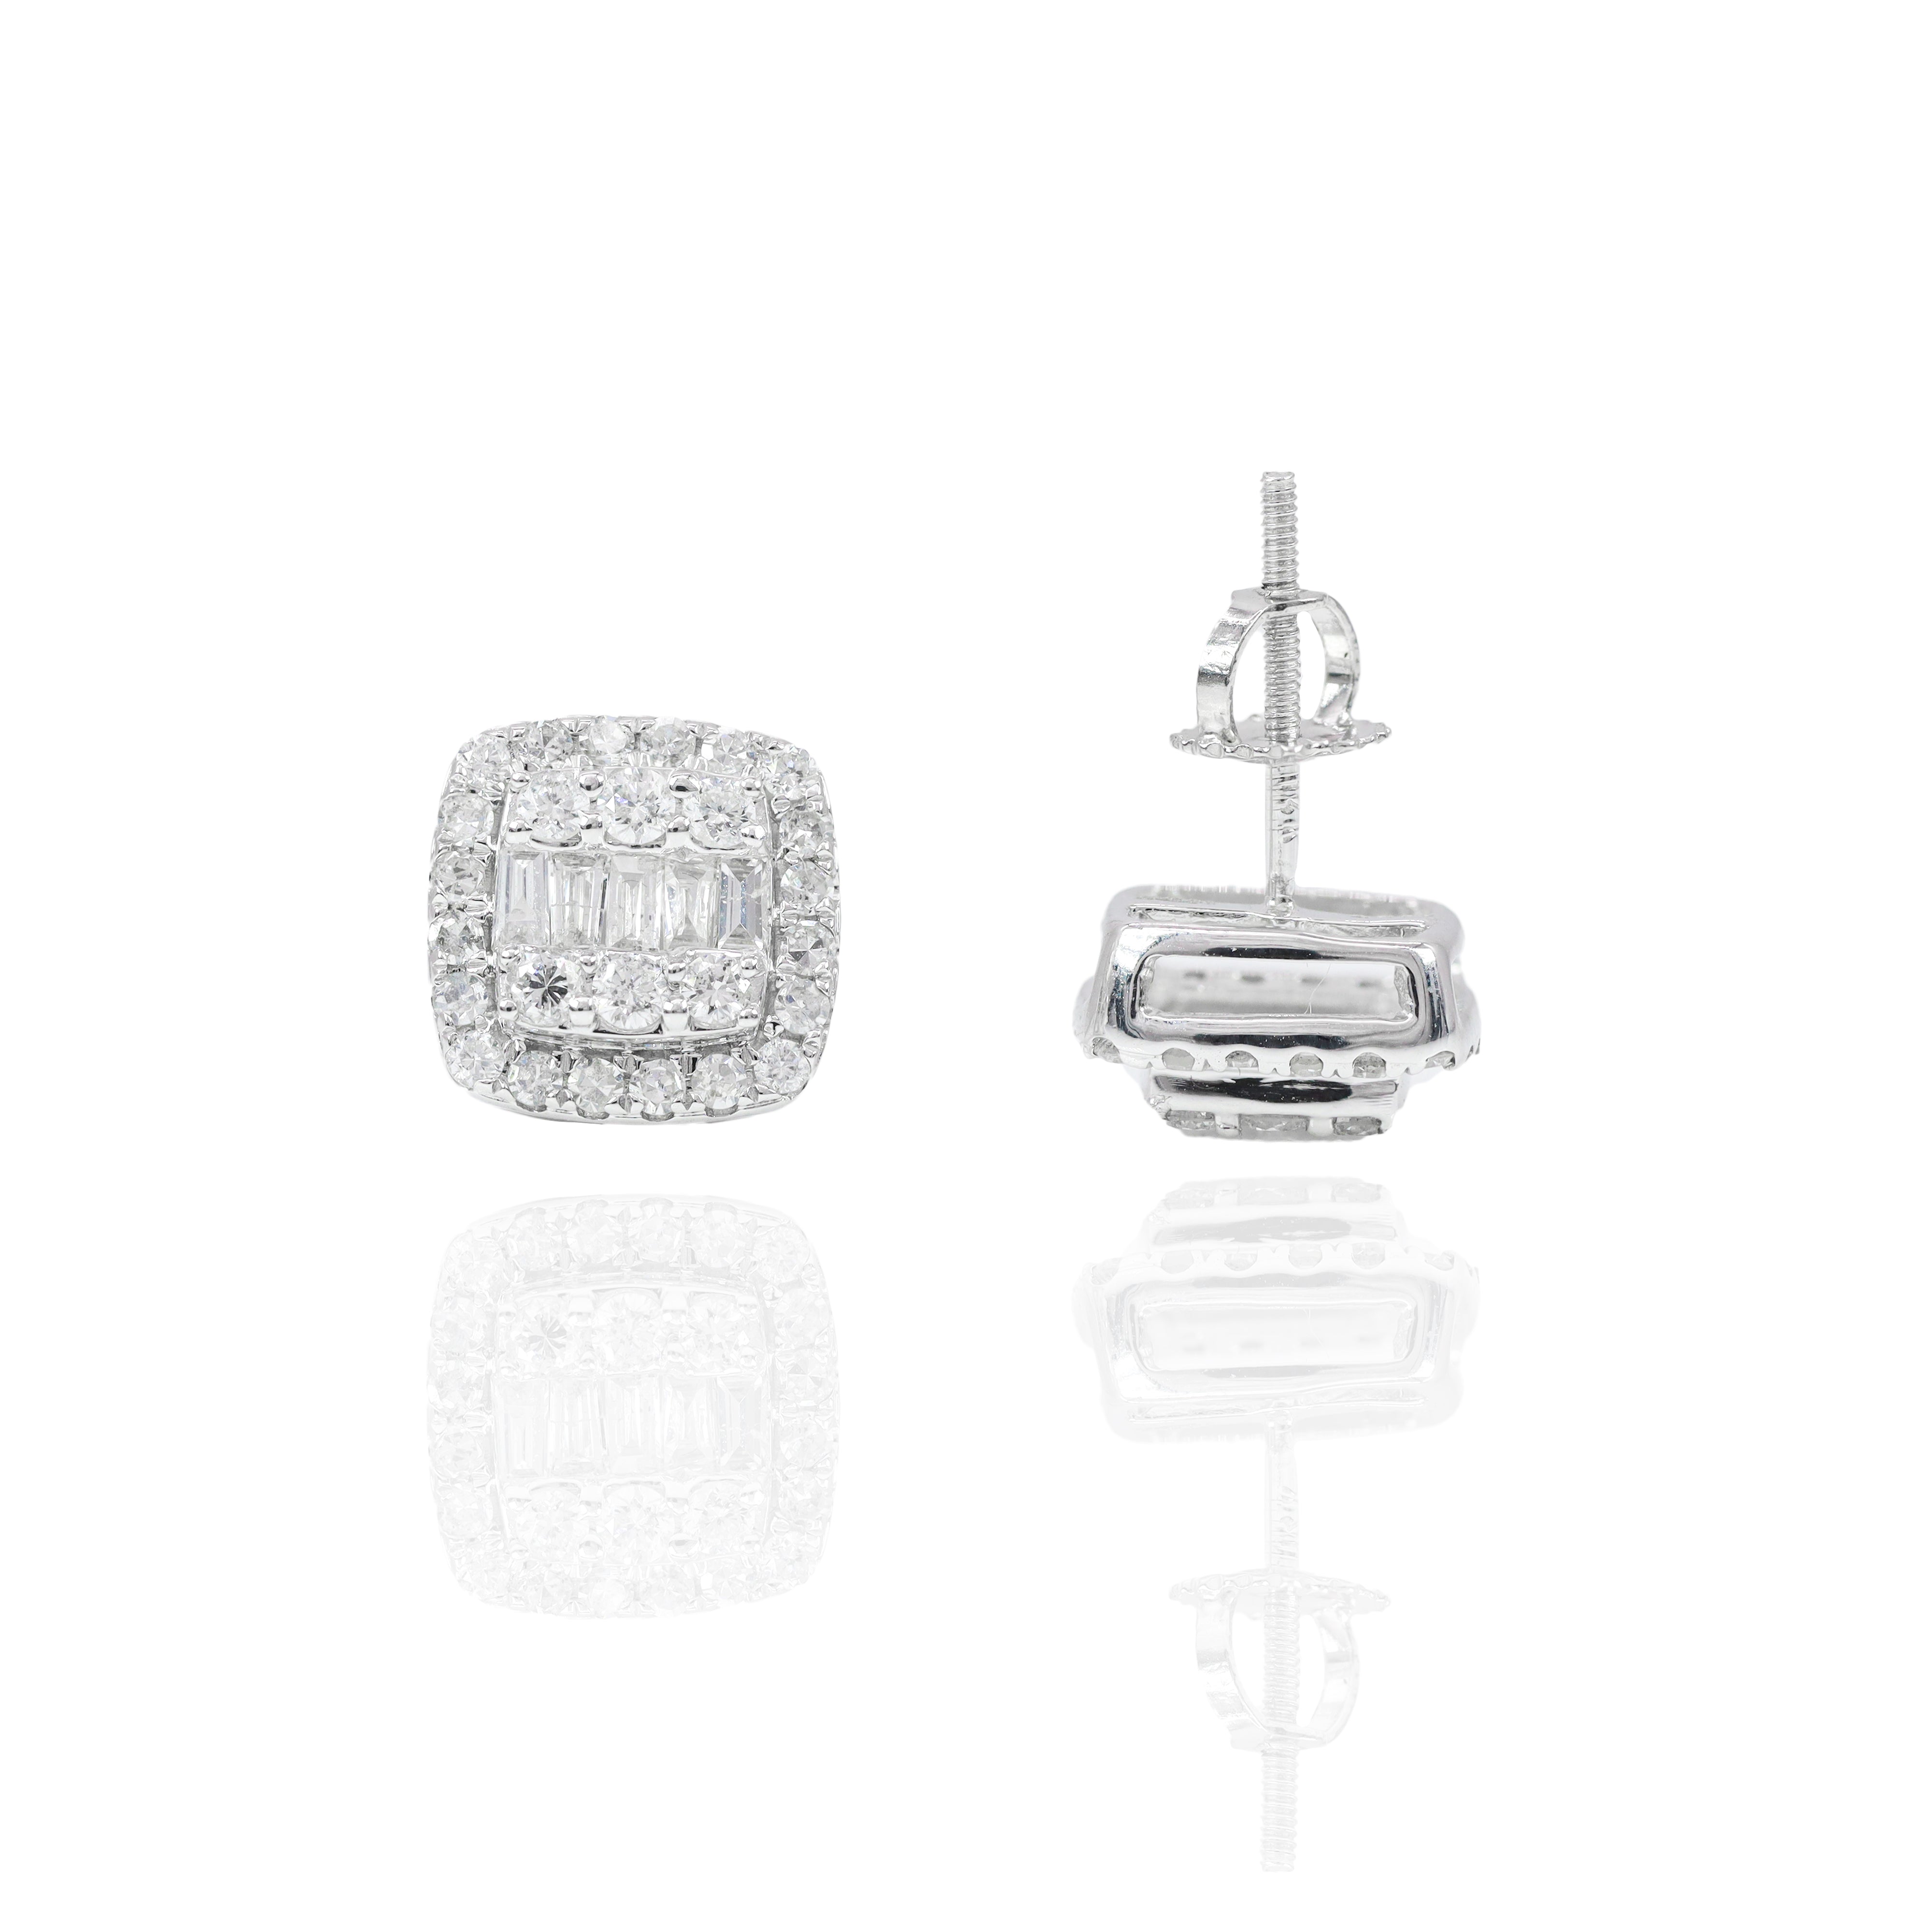 Middle Baguette with Two Row Diamond Border Earrings